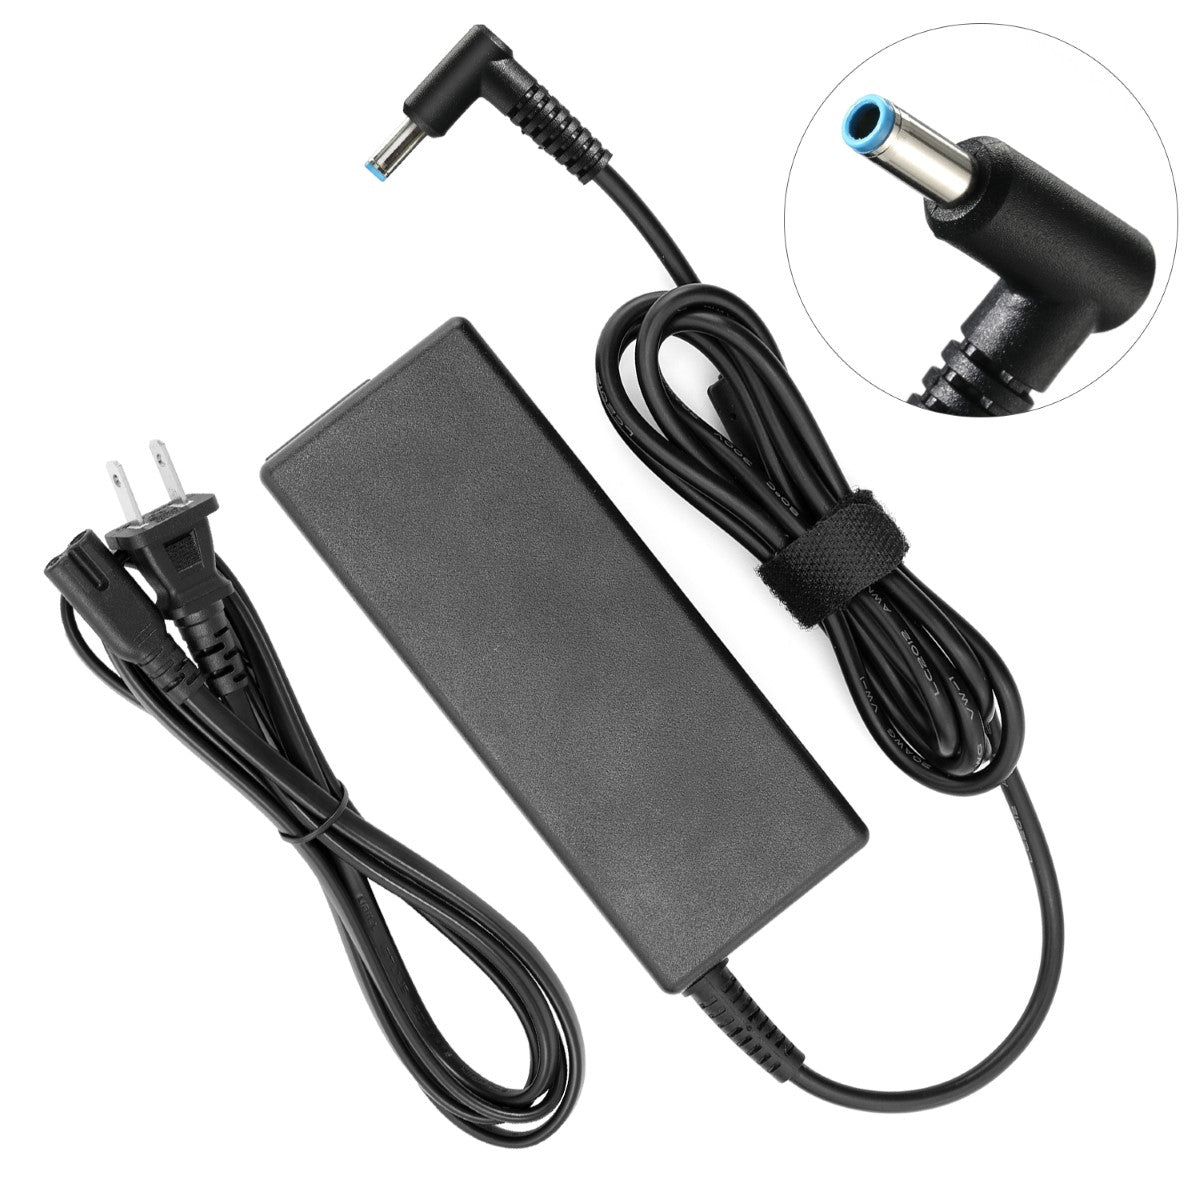 AC Adapter Charger for HP Pavilion 14-ab167us Laptop.